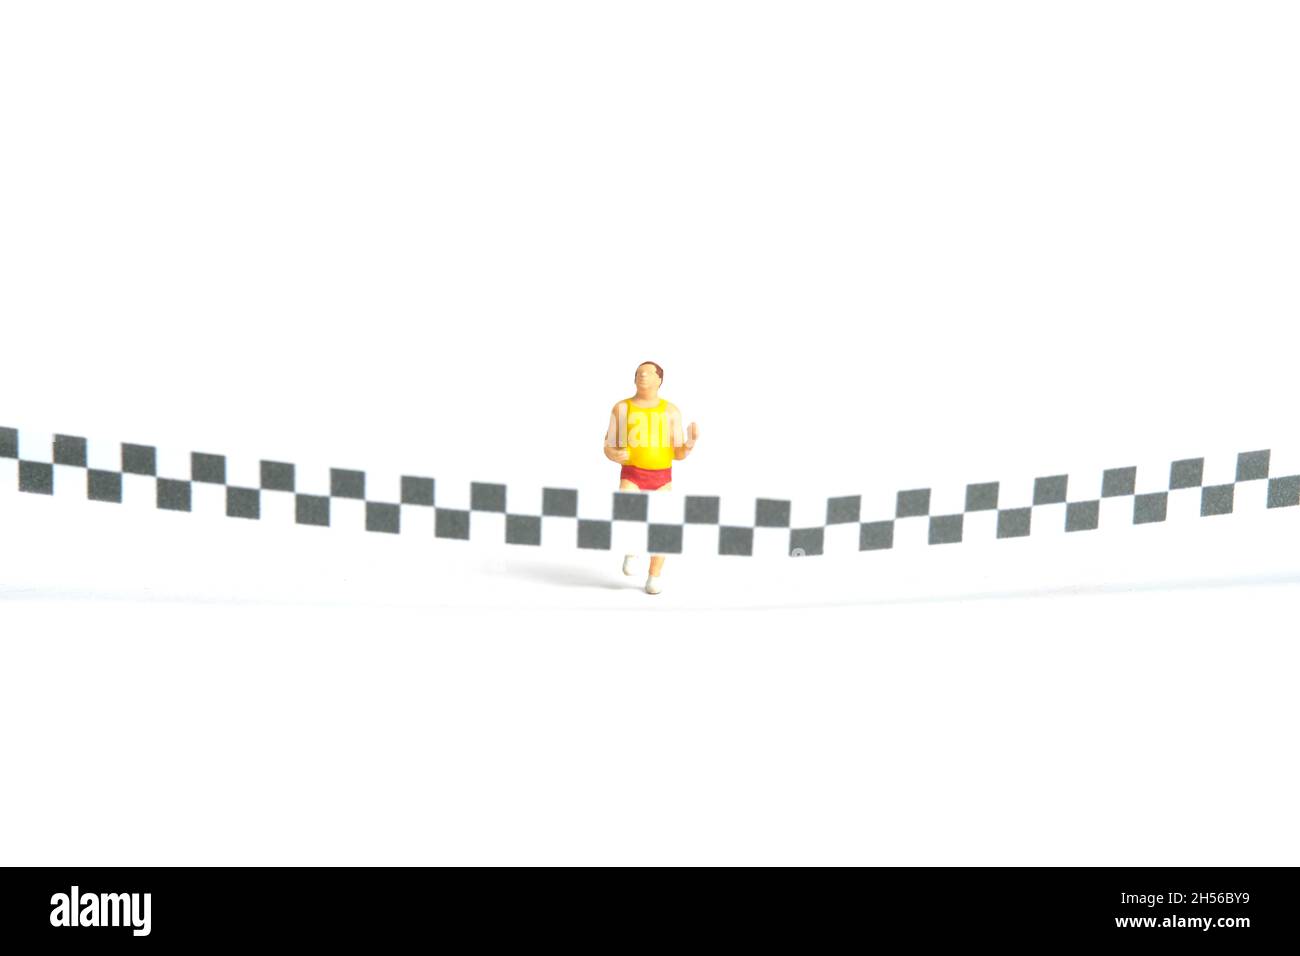 Miniature people toy figure photography. A fat man running towards the finish line, isolated on white background. Image photo Stock Photo